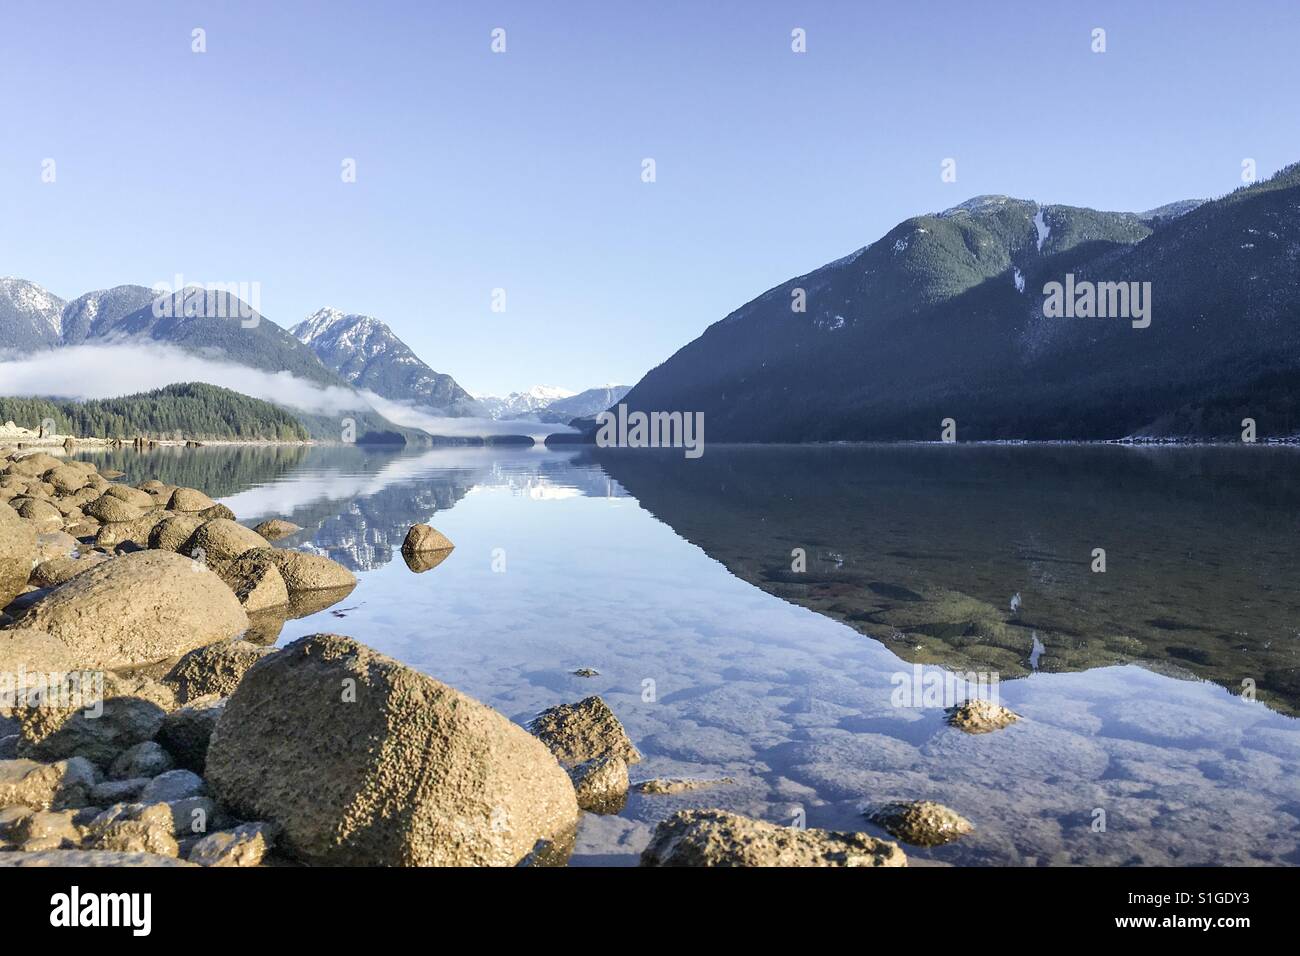 Tranquil waters at Alouette Lake, British Columbia, Canada Stock Photo